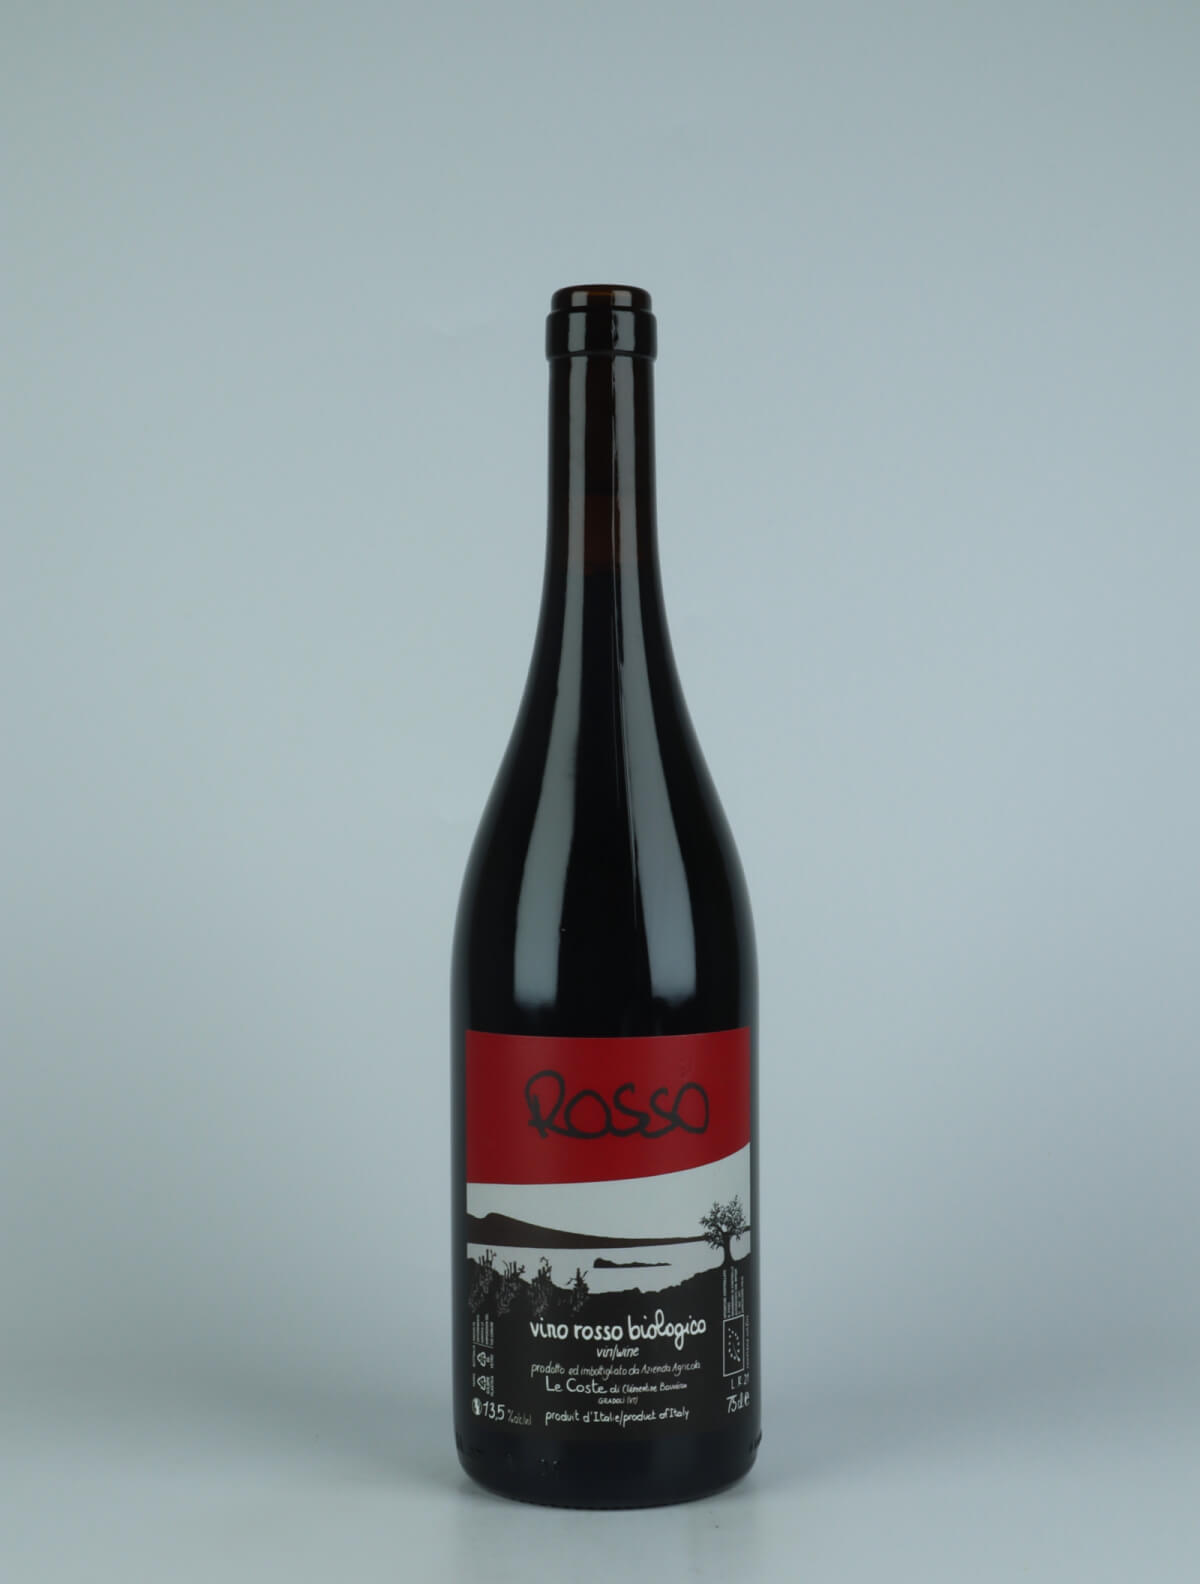 A bottle 2021 Rosso Red wine from Le Coste, Lazio in Italy